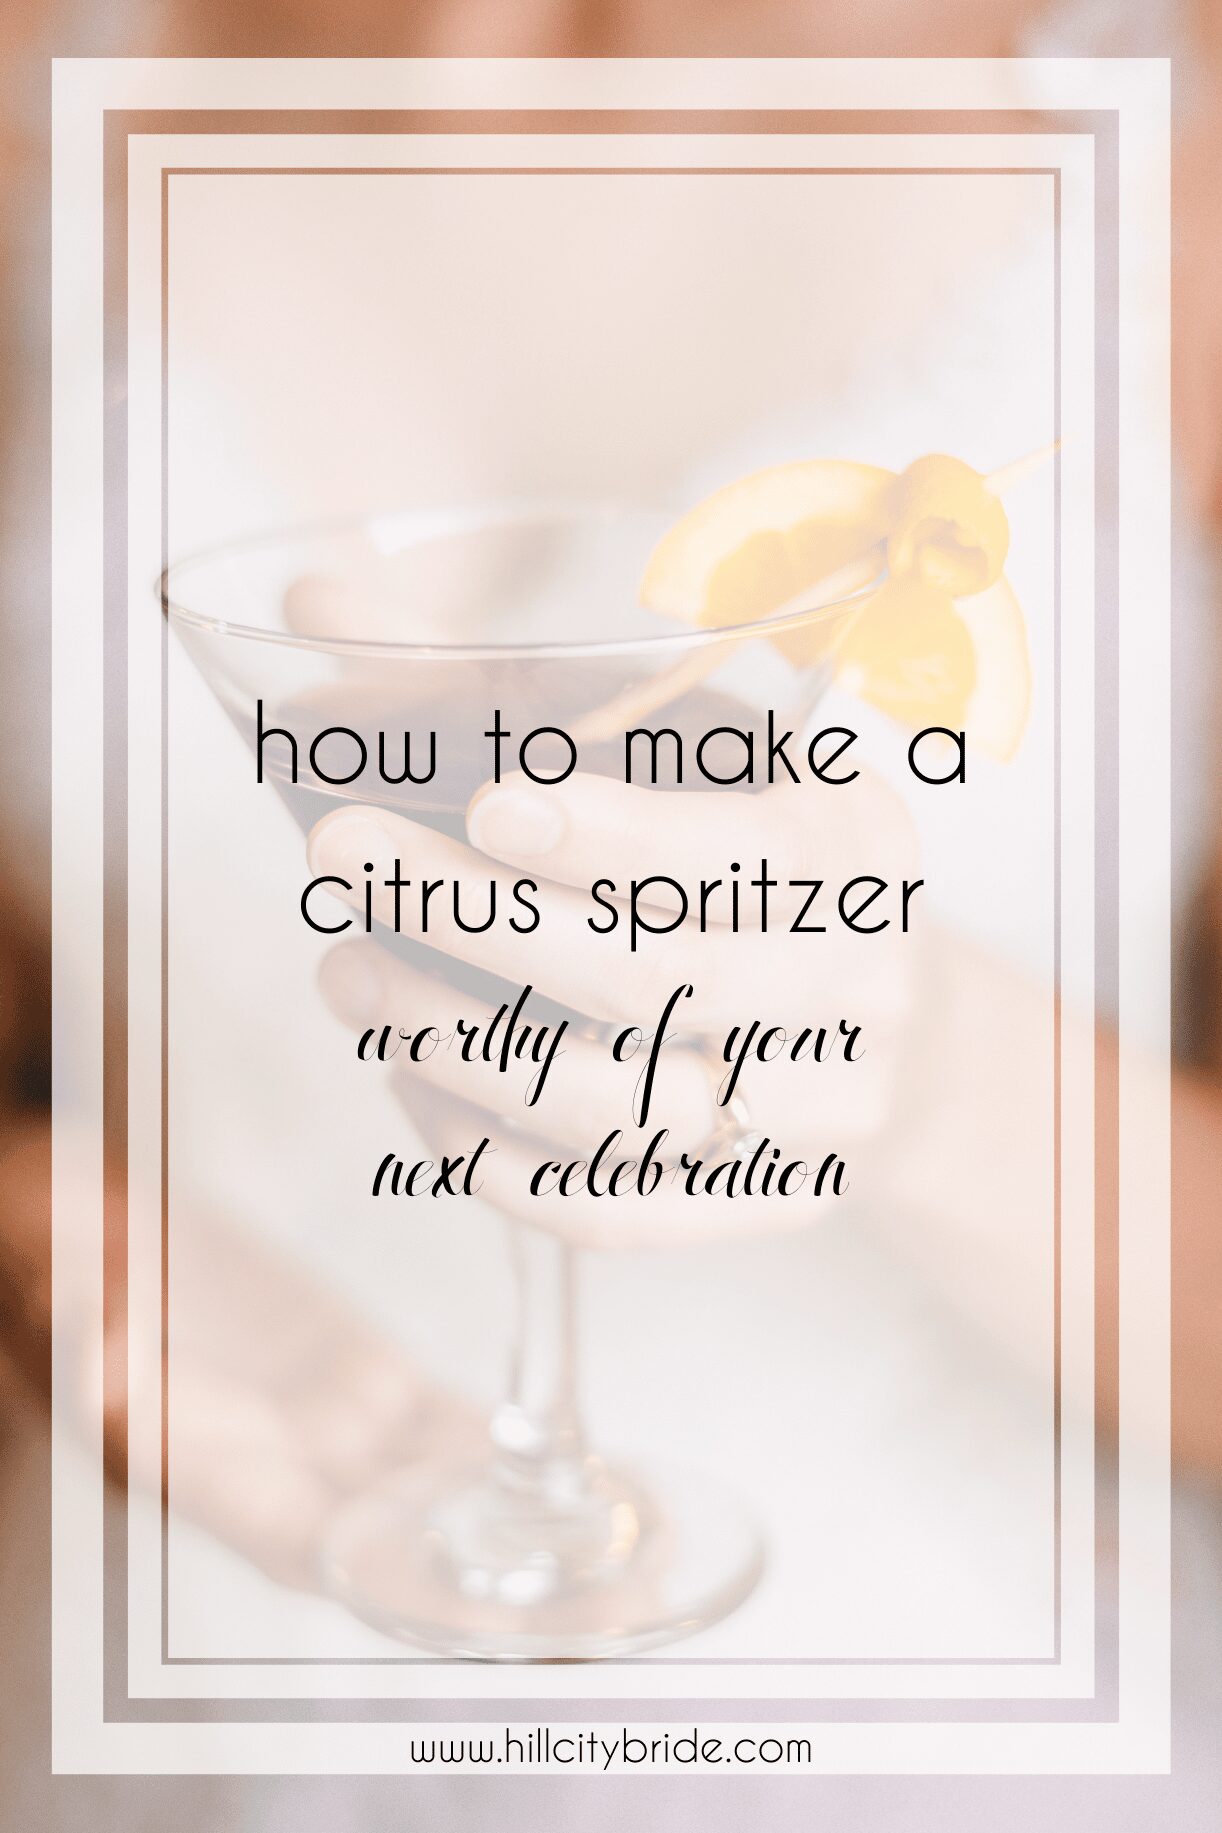 How to Make a Yummy Citrus Spritzer Recipe for New Year's Eve and Celebrations